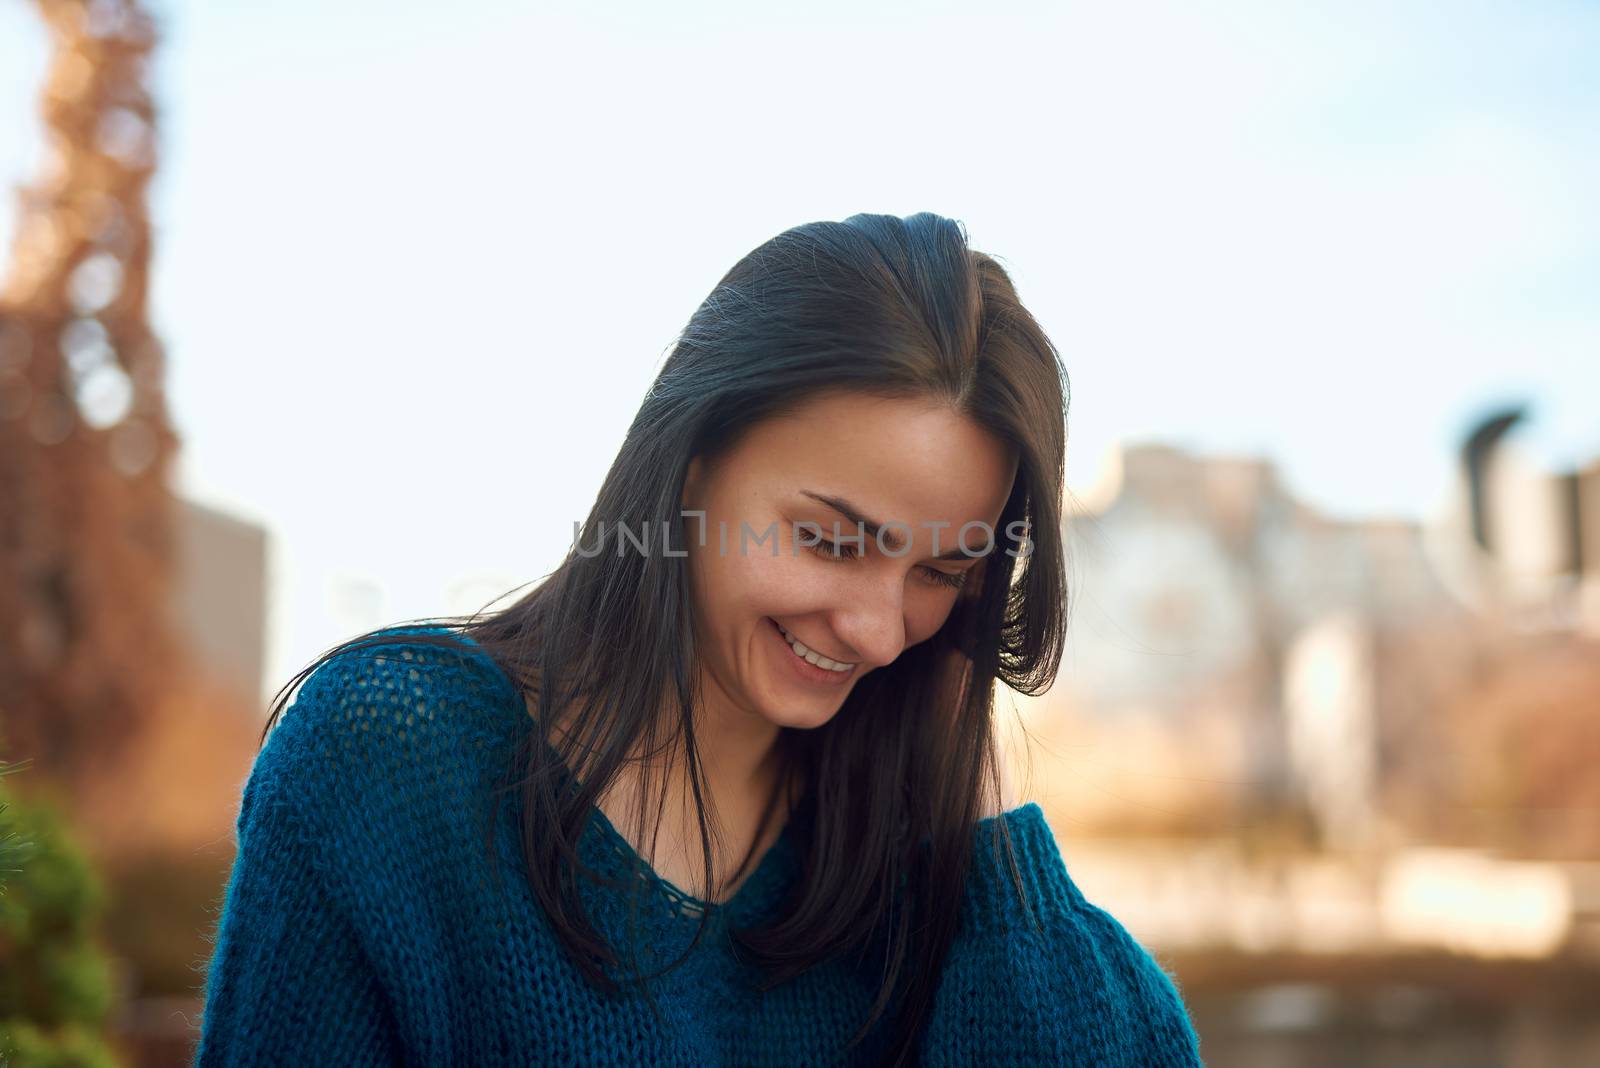 Young beautiful woman looking down with happy smile while tidying up her hair with hand on defocused background of city street